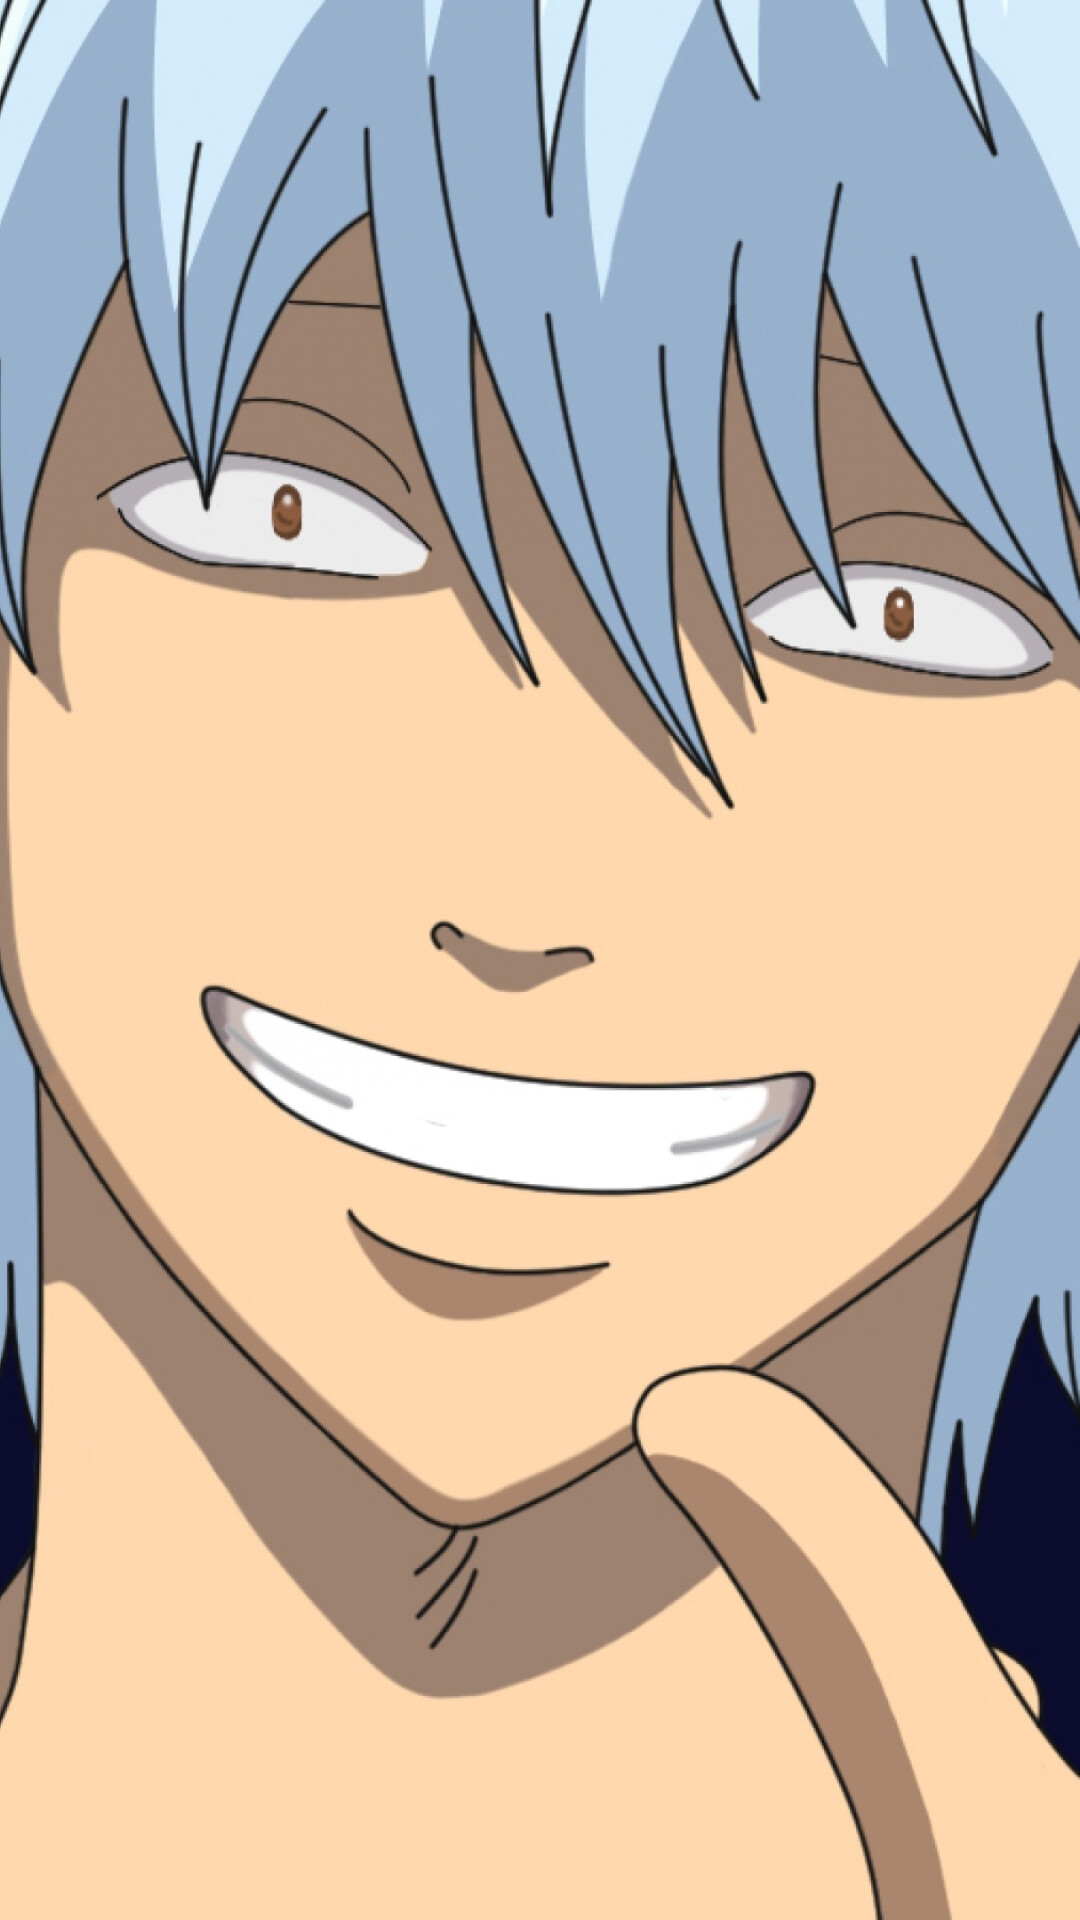 Gintama (TV Series): Sakata Gintoki, Silvery-blue hair in a perpetually messy state, Anime character. 1080x1920 Full HD Background.